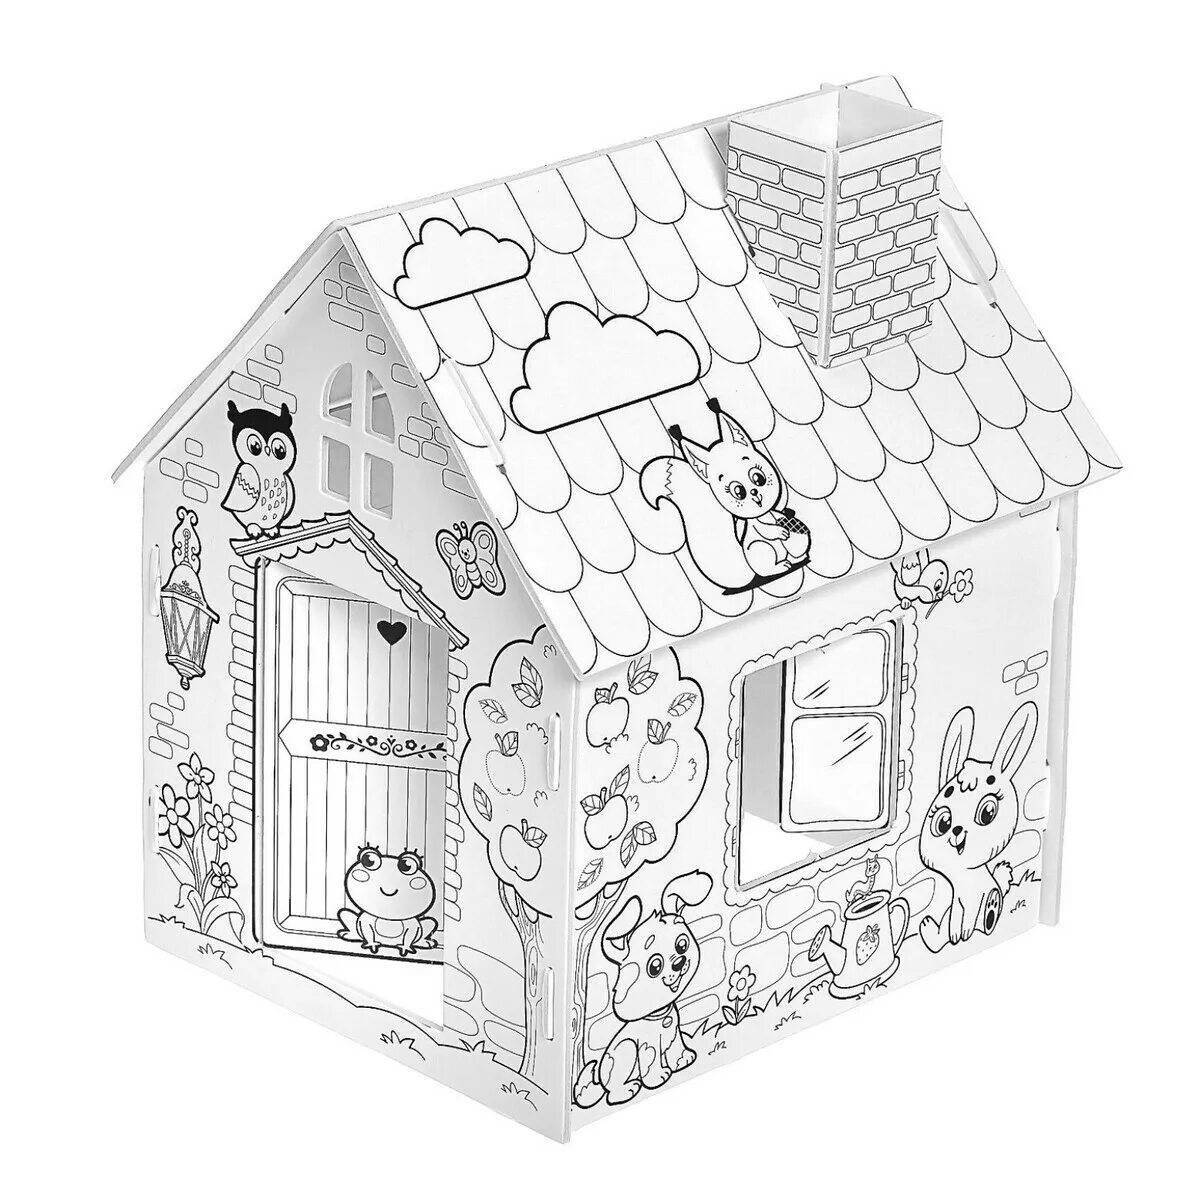 Exquisite development house coloring book